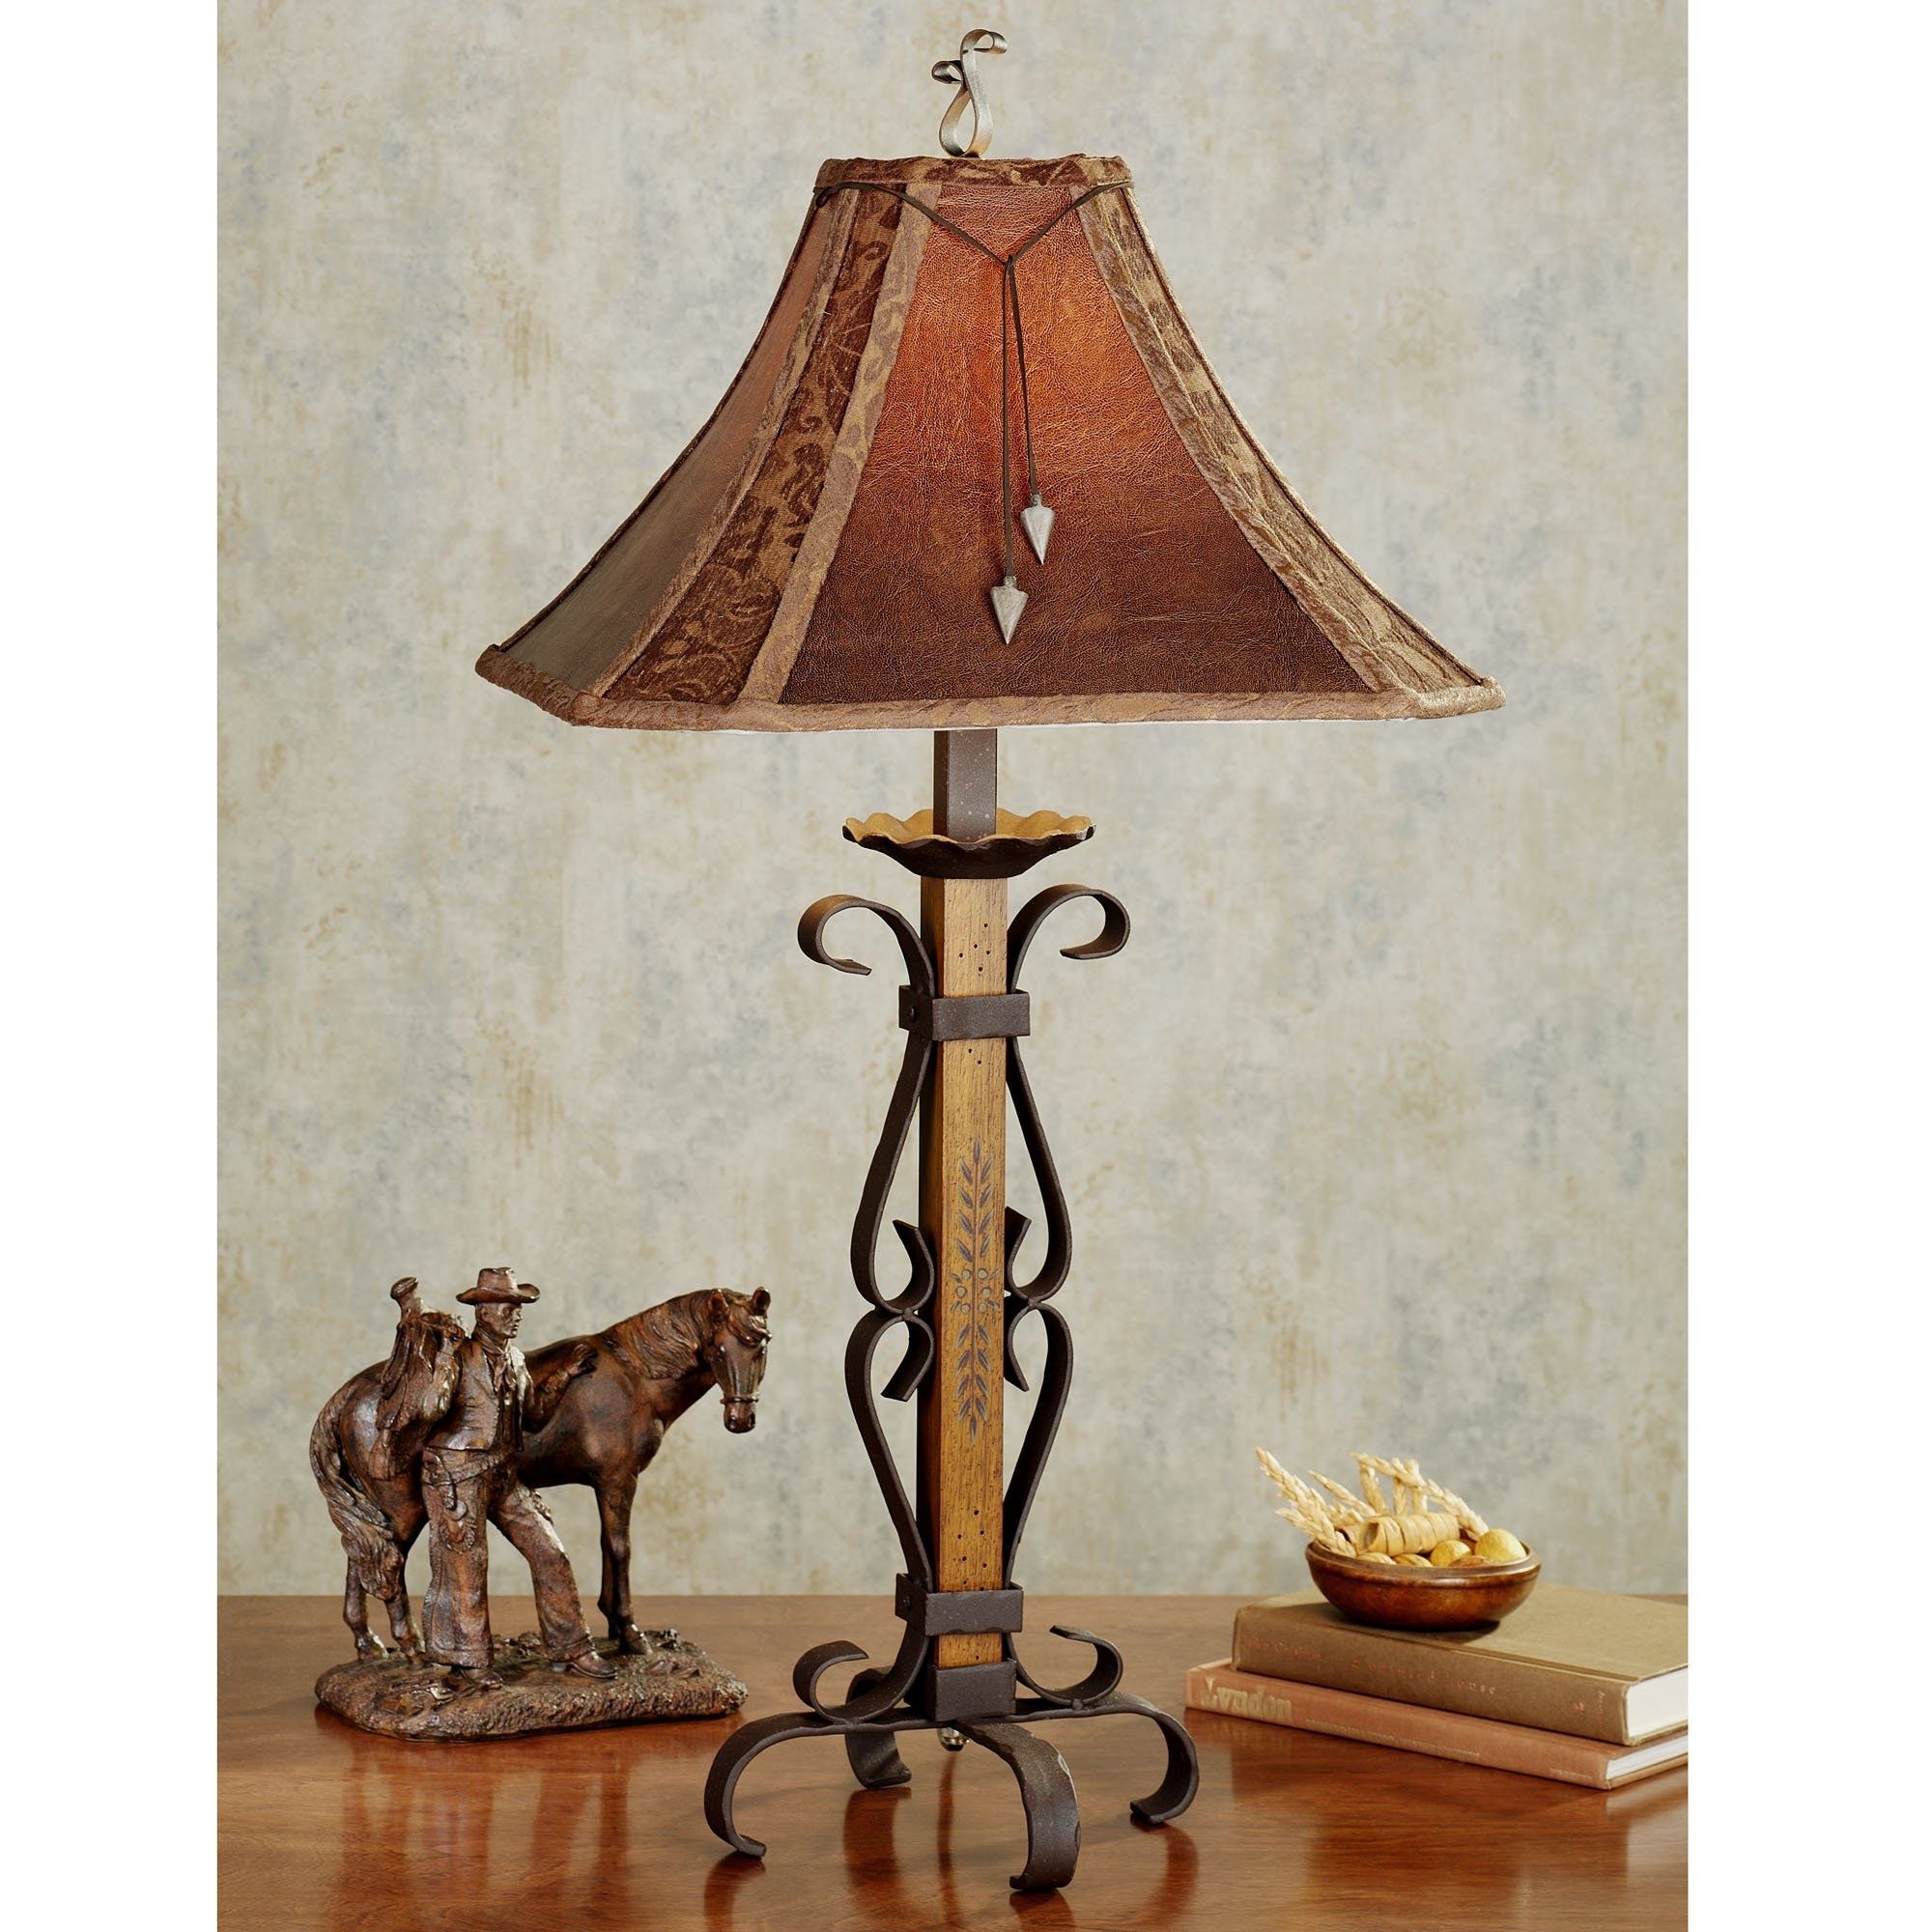 Rustic Living Room Table Lamps Modern House, Rustic Contemporary With Rustic Living Room Table Lamps (View 2 of 15)